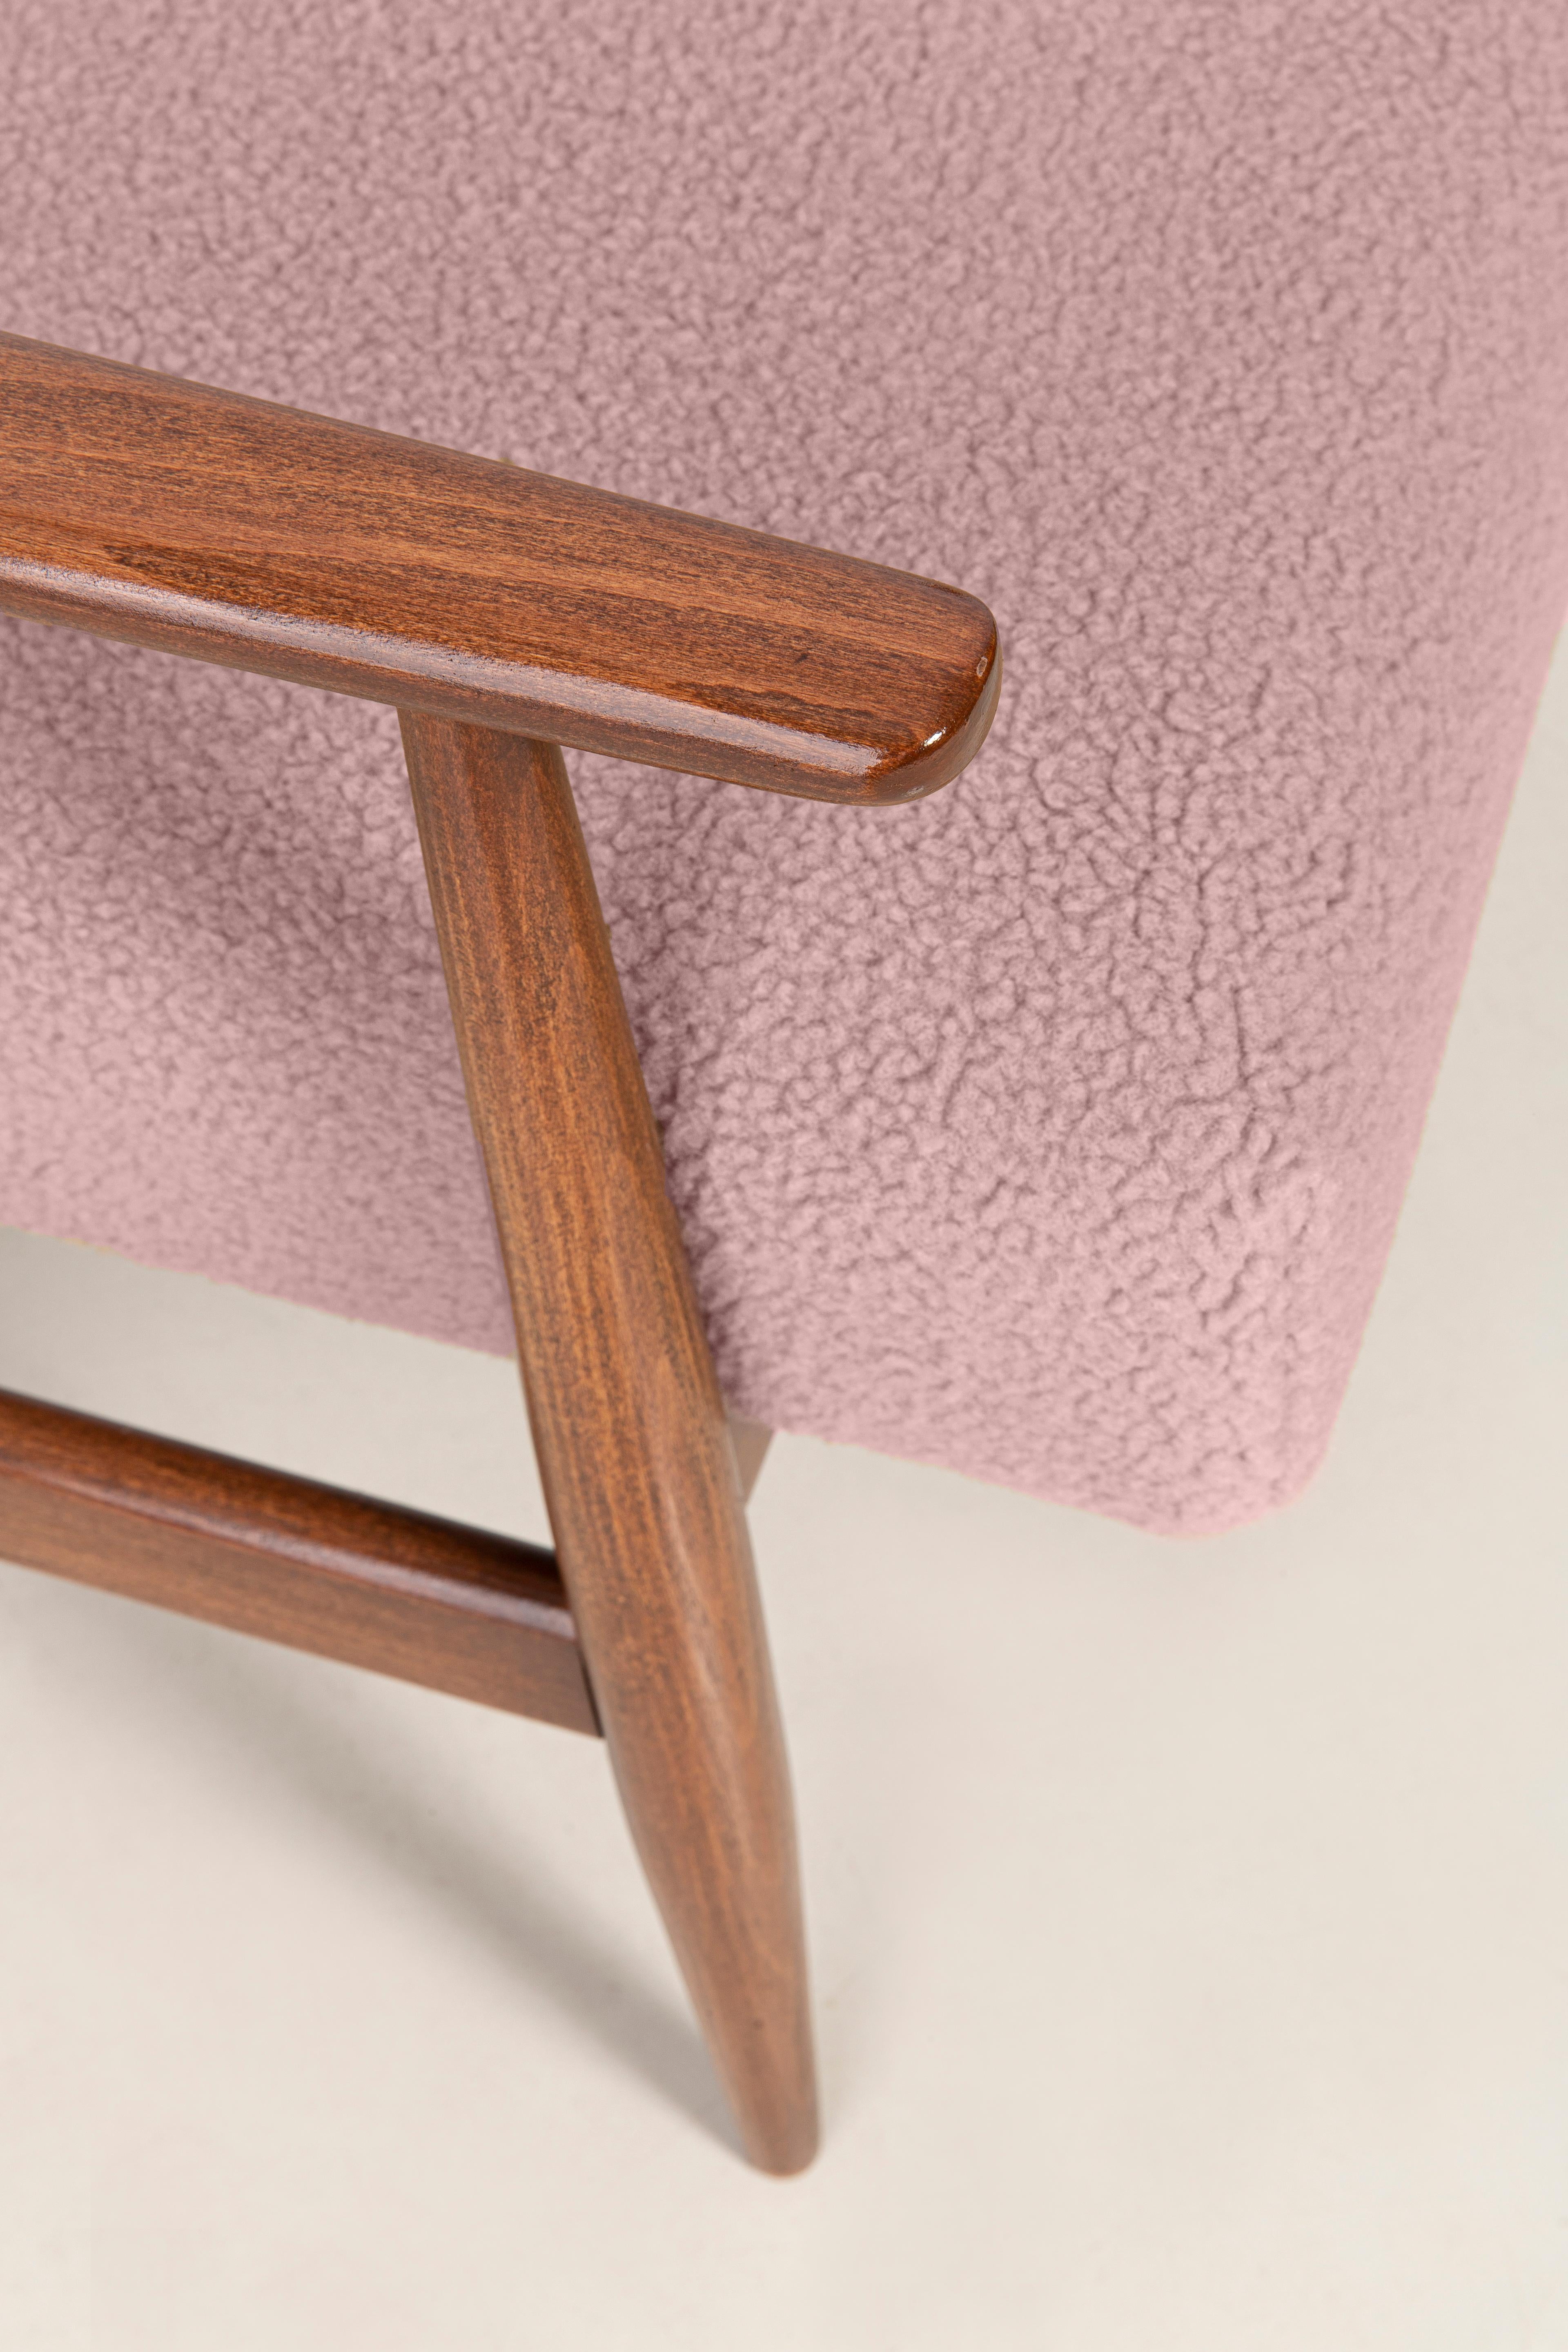 dusty pink chair